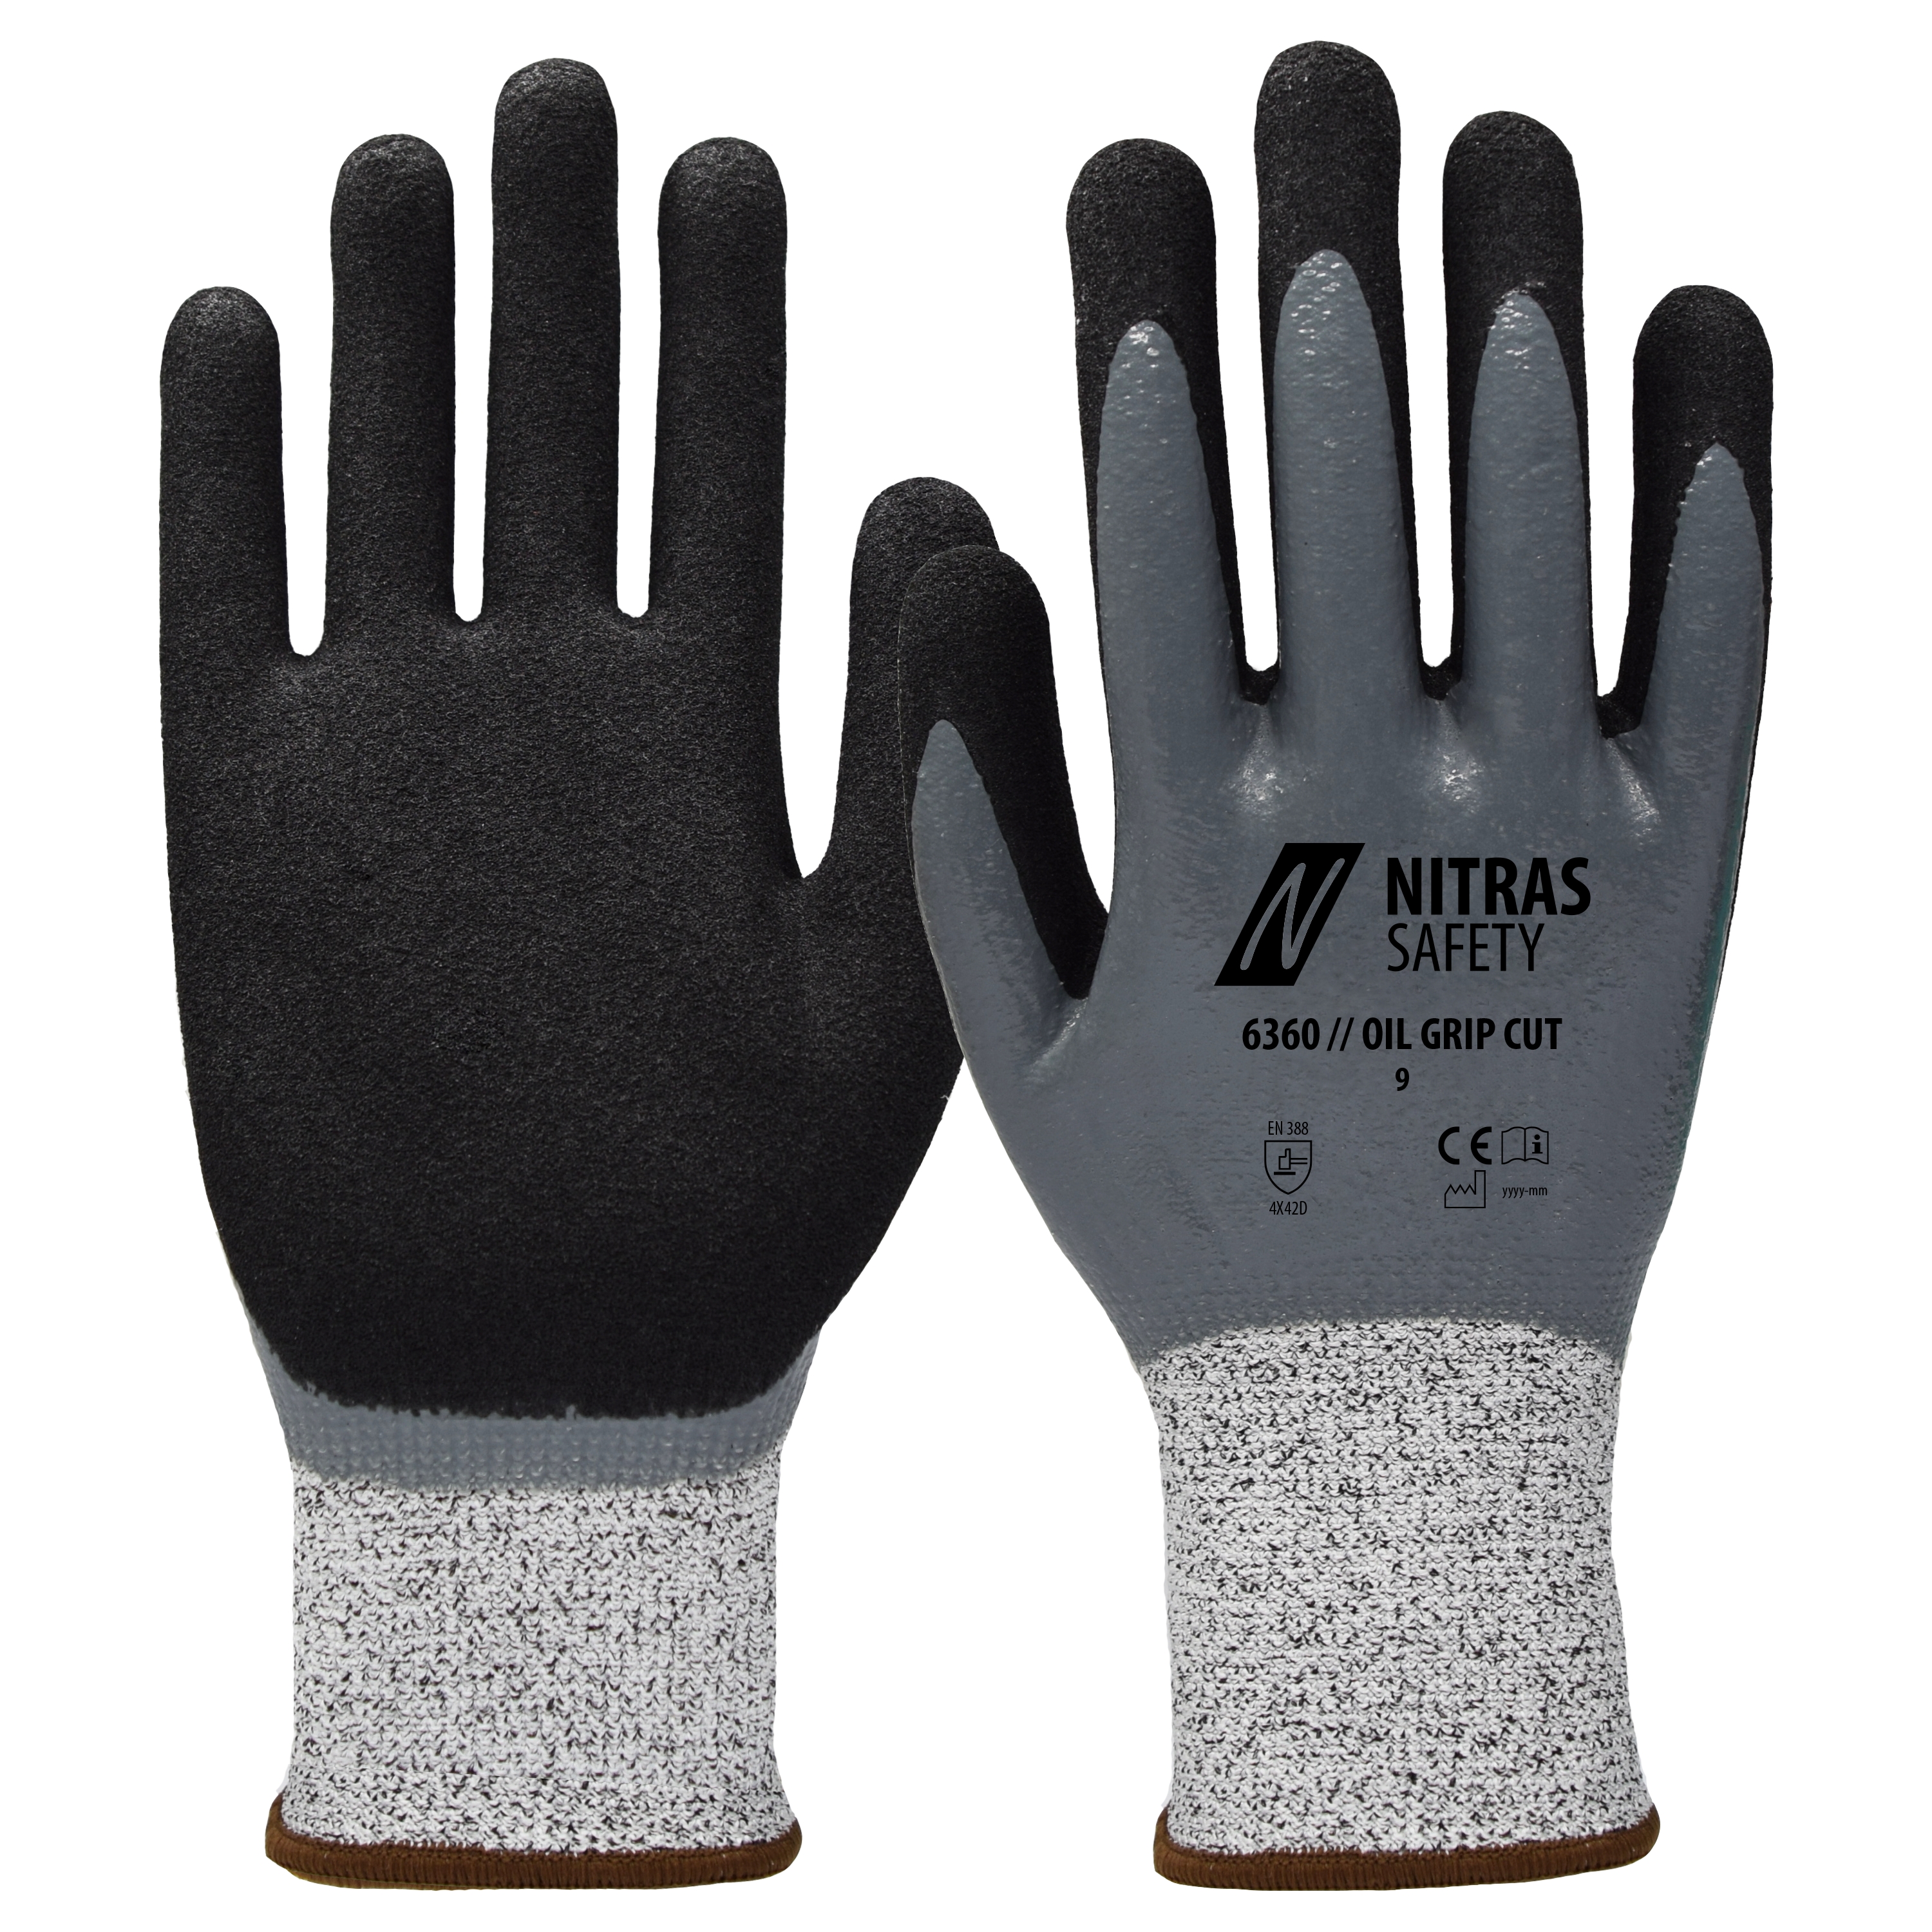 The Ultimate Guide To Cut-Resistant Work Gloves